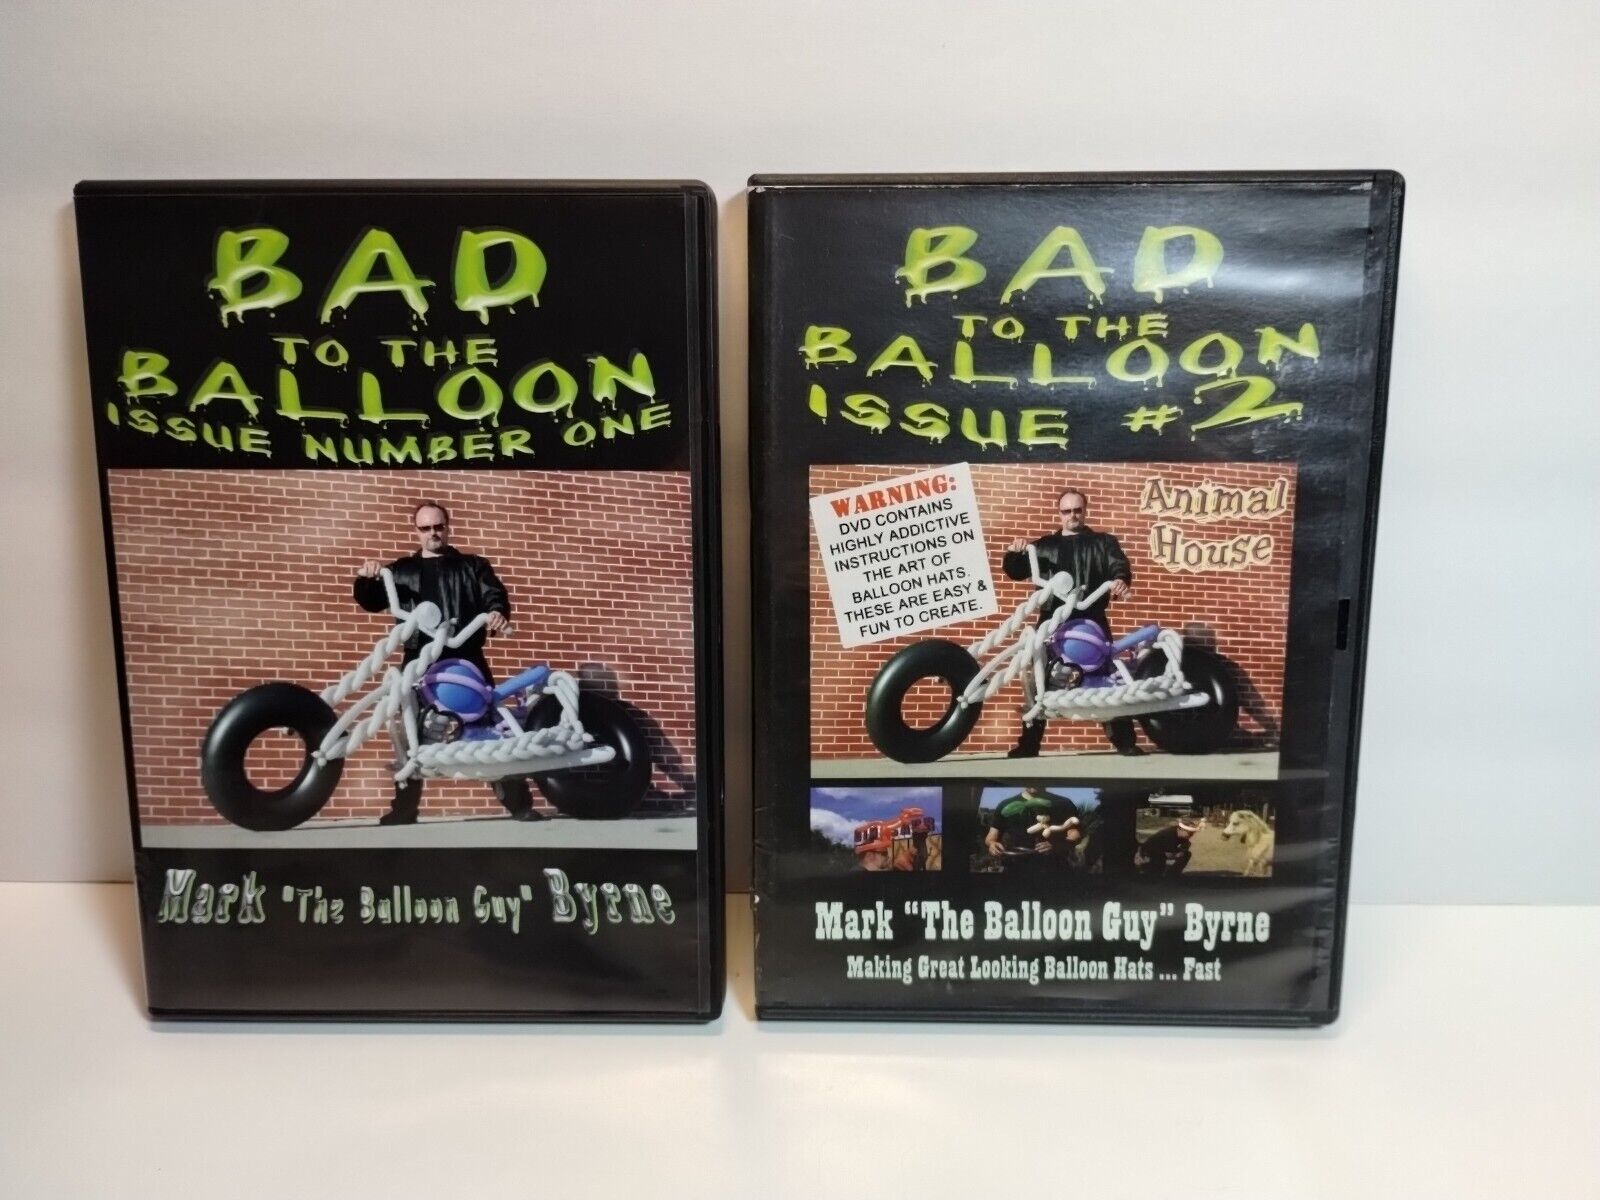 Bad To The Balloon by Mark Byrne 2007 - Volume 1 & 2 - DVD